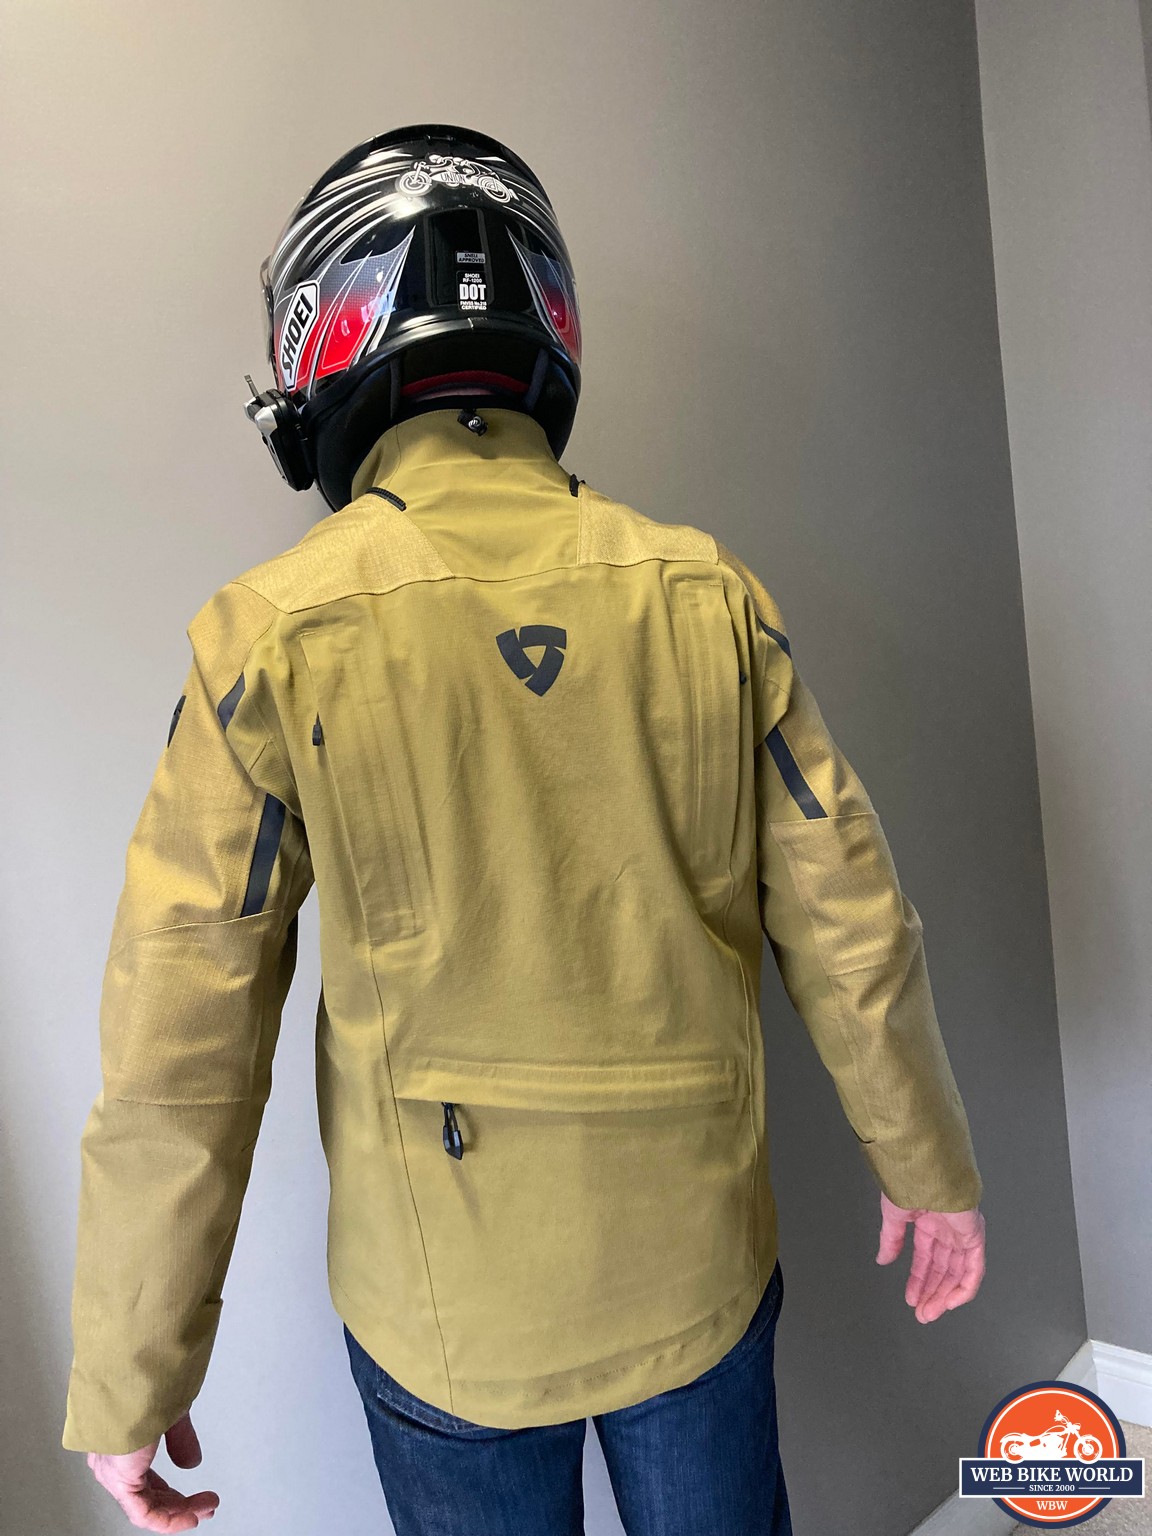 Rear view of the Element jacket